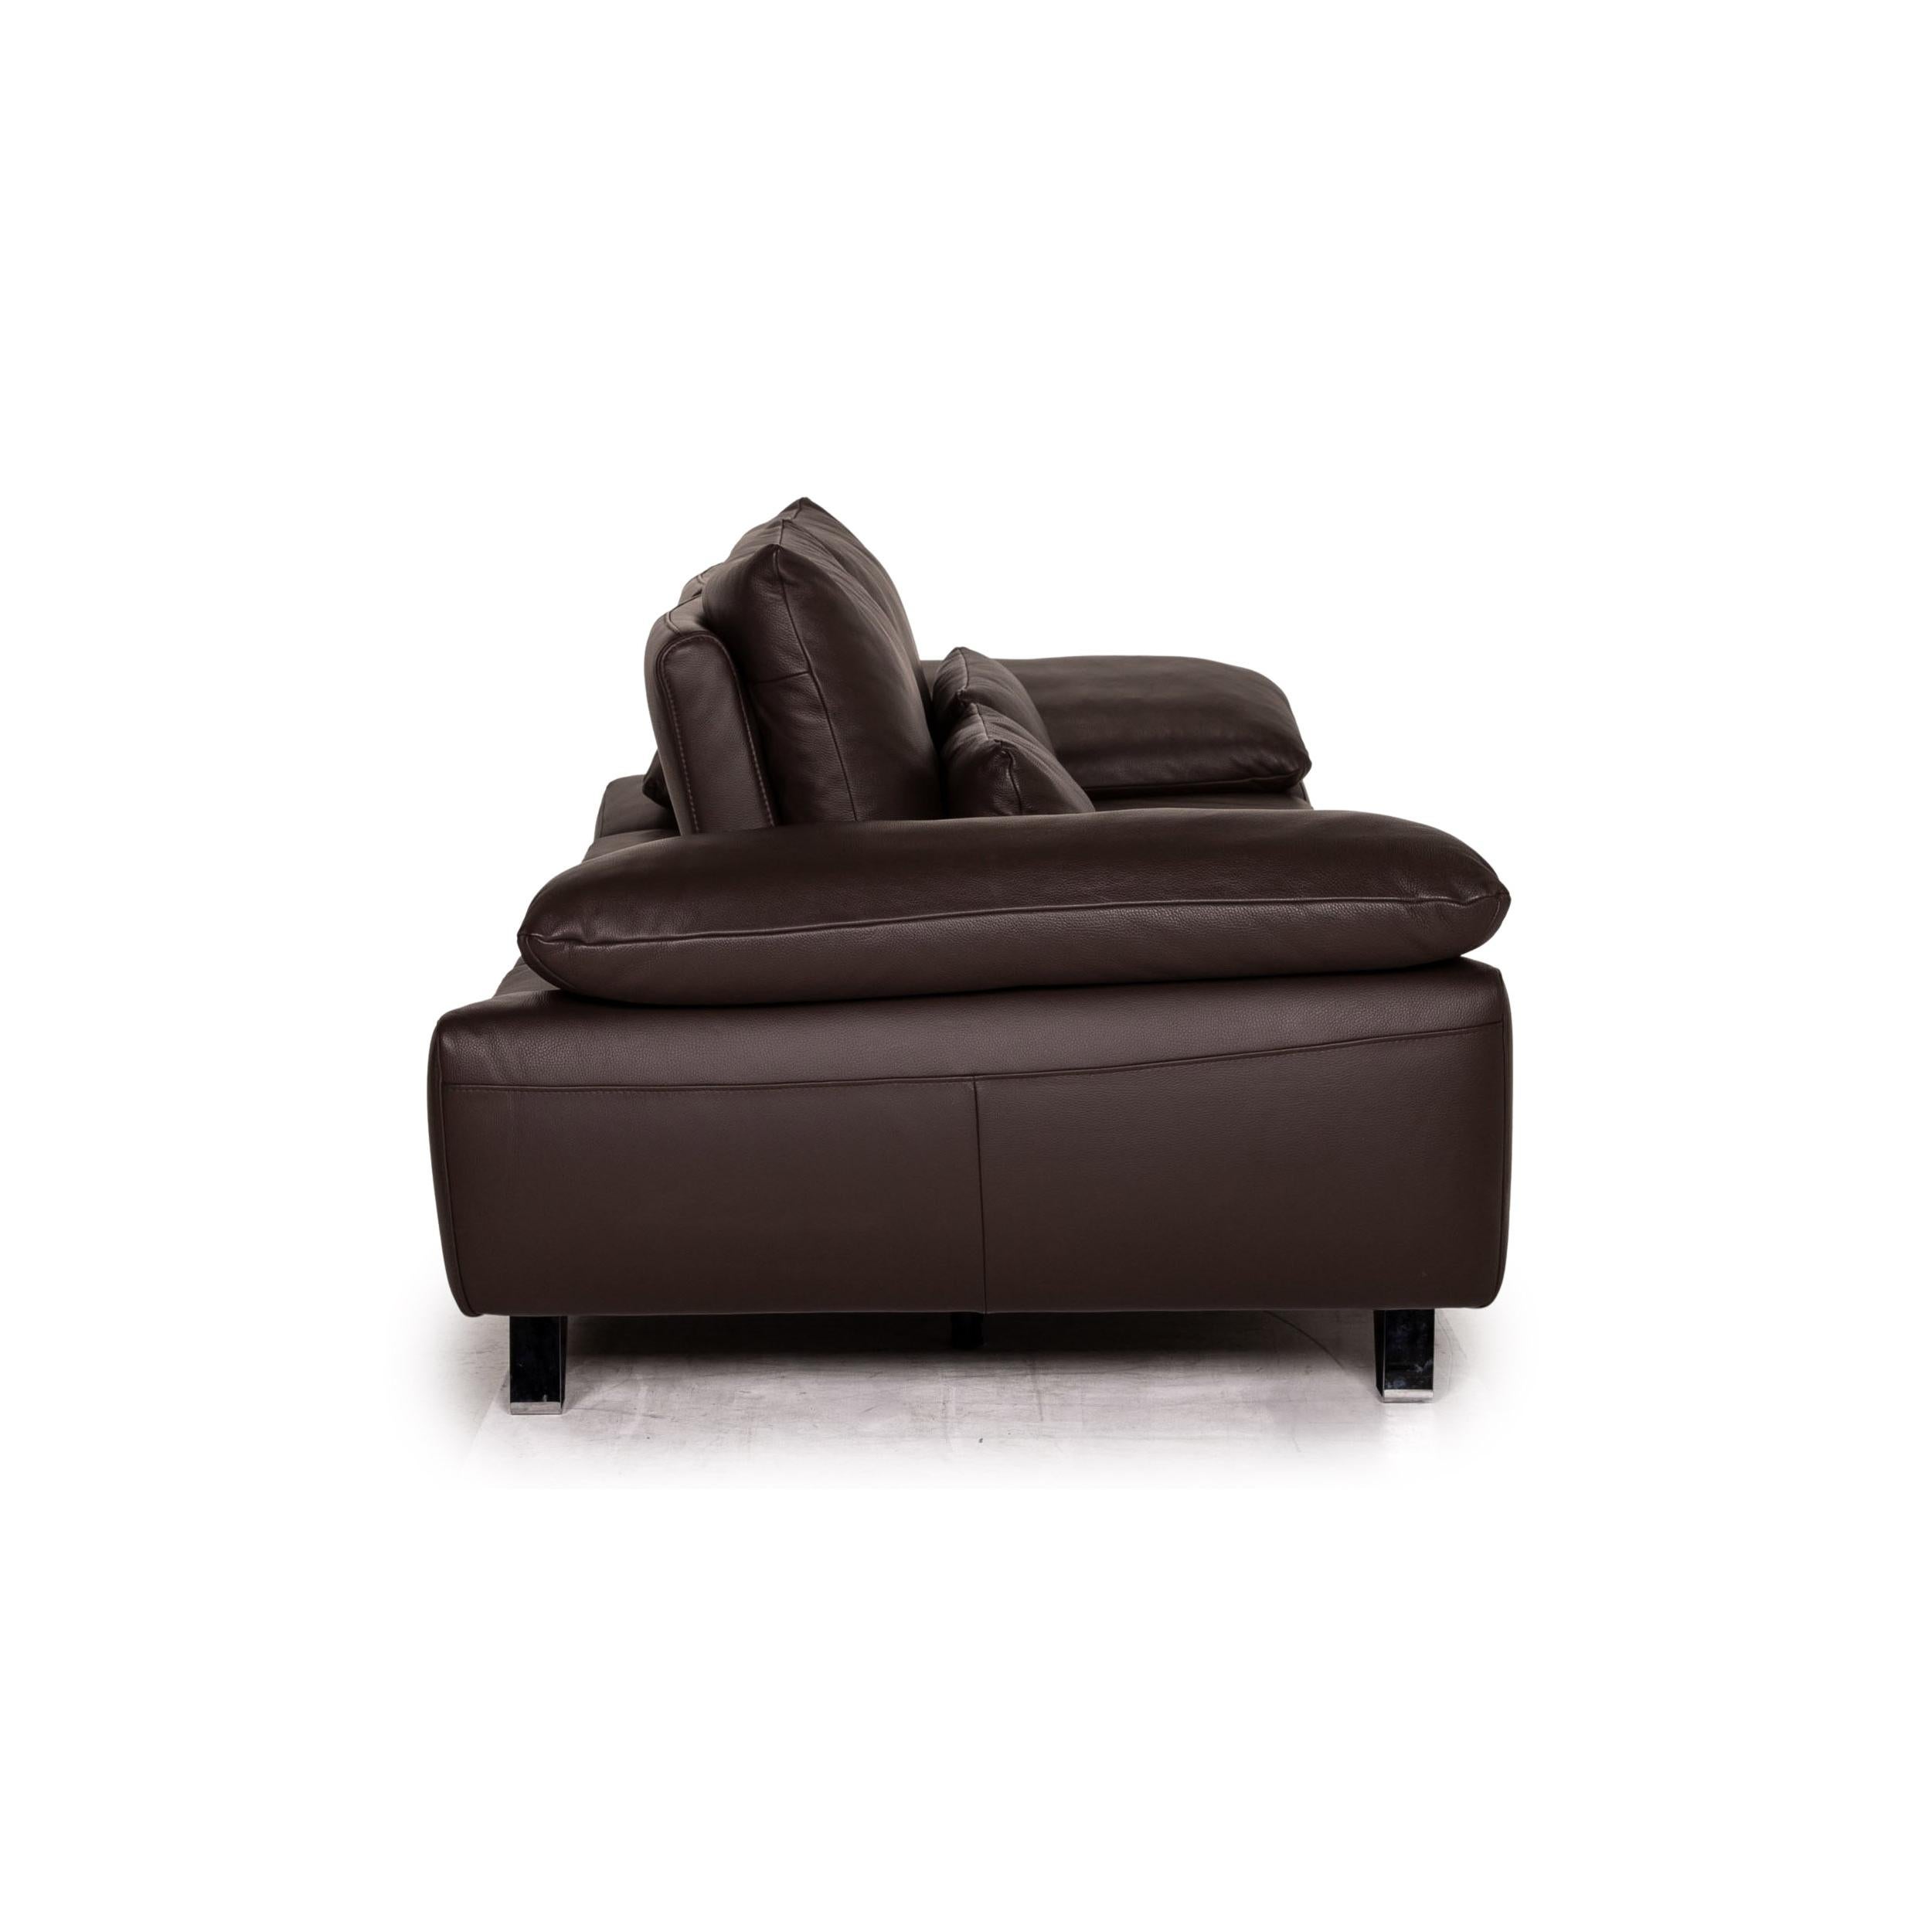 Musterring MR 680 Two-Seater Sofa Brown Leather Couch Function 4